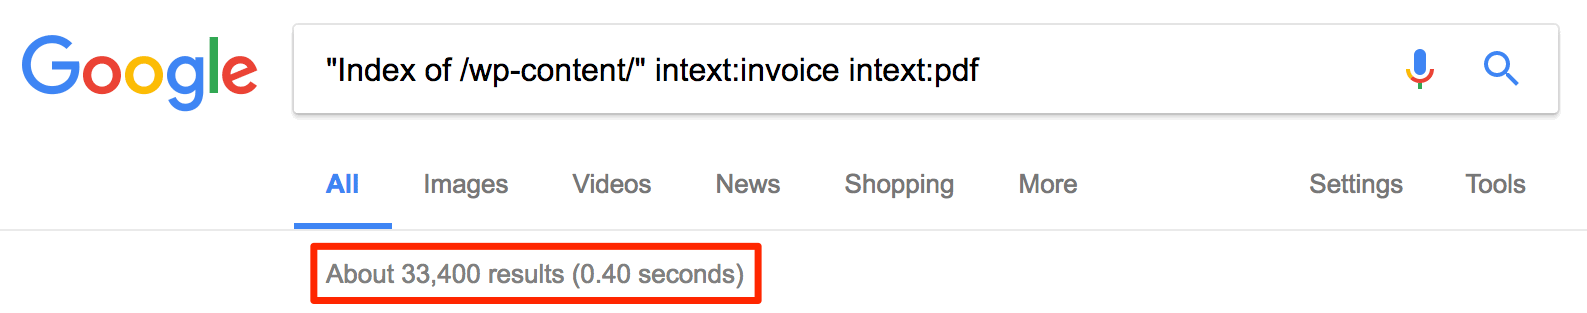 Screenshot of what is indexed by Google in relation to the /wp-content/ folder and includes the text "invoice" and is a PDF - therefore signifying what invoices Google has indexed from this folder across WordPress installs.